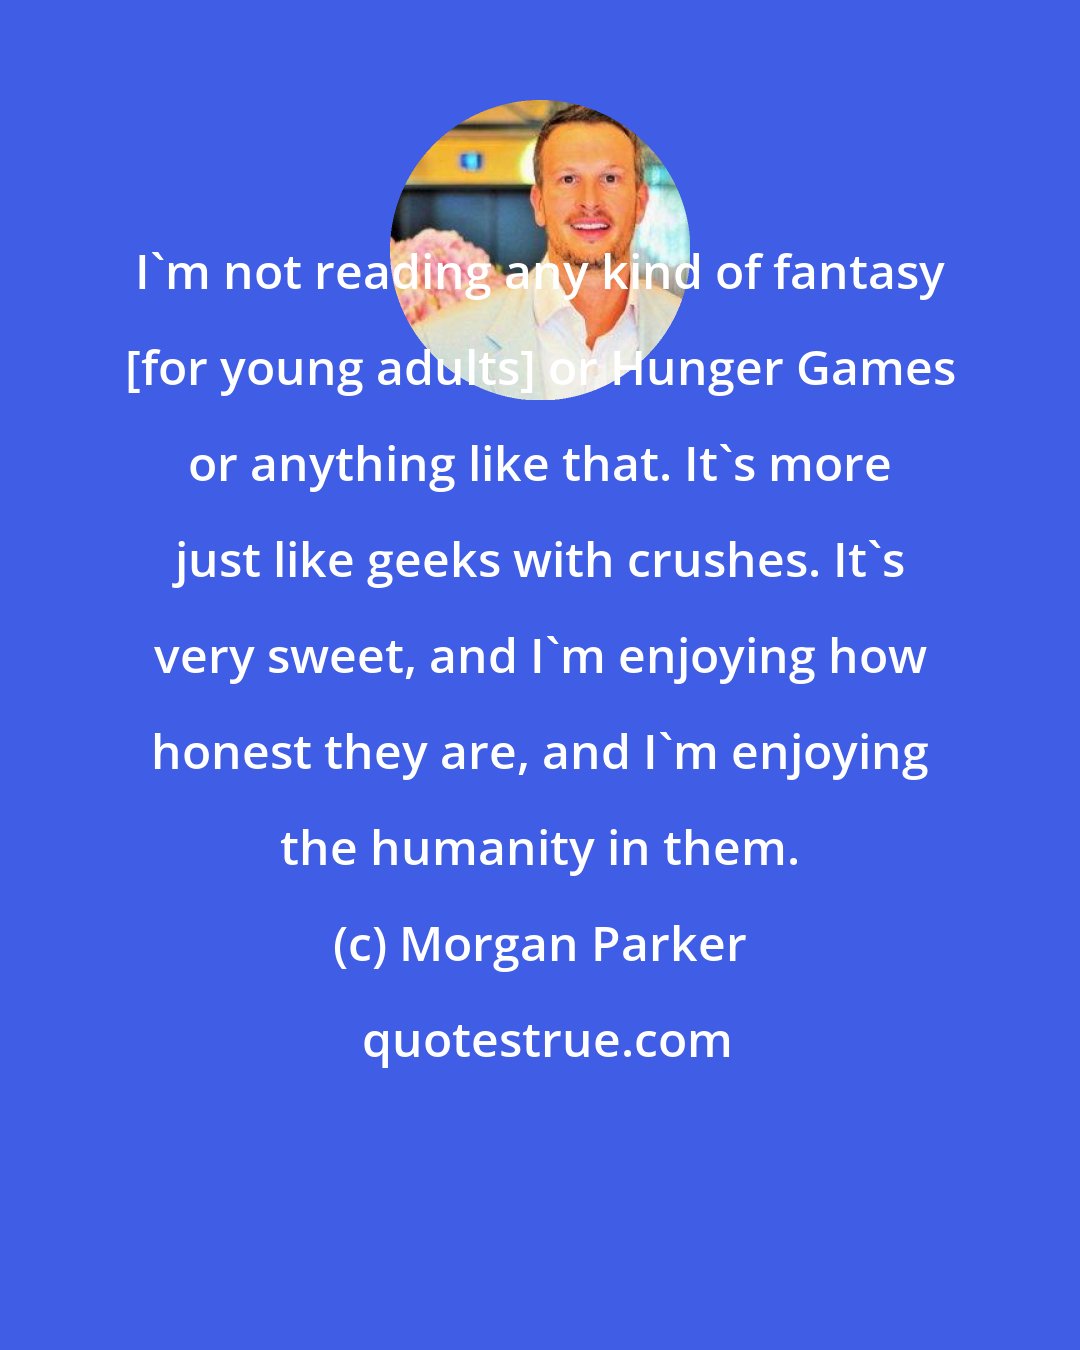 Morgan Parker: I'm not reading any kind of fantasy [for young adults] or Hunger Games or anything like that. It's more just like geeks with crushes. It's very sweet, and I'm enjoying how honest they are, and I'm enjoying the humanity in them.